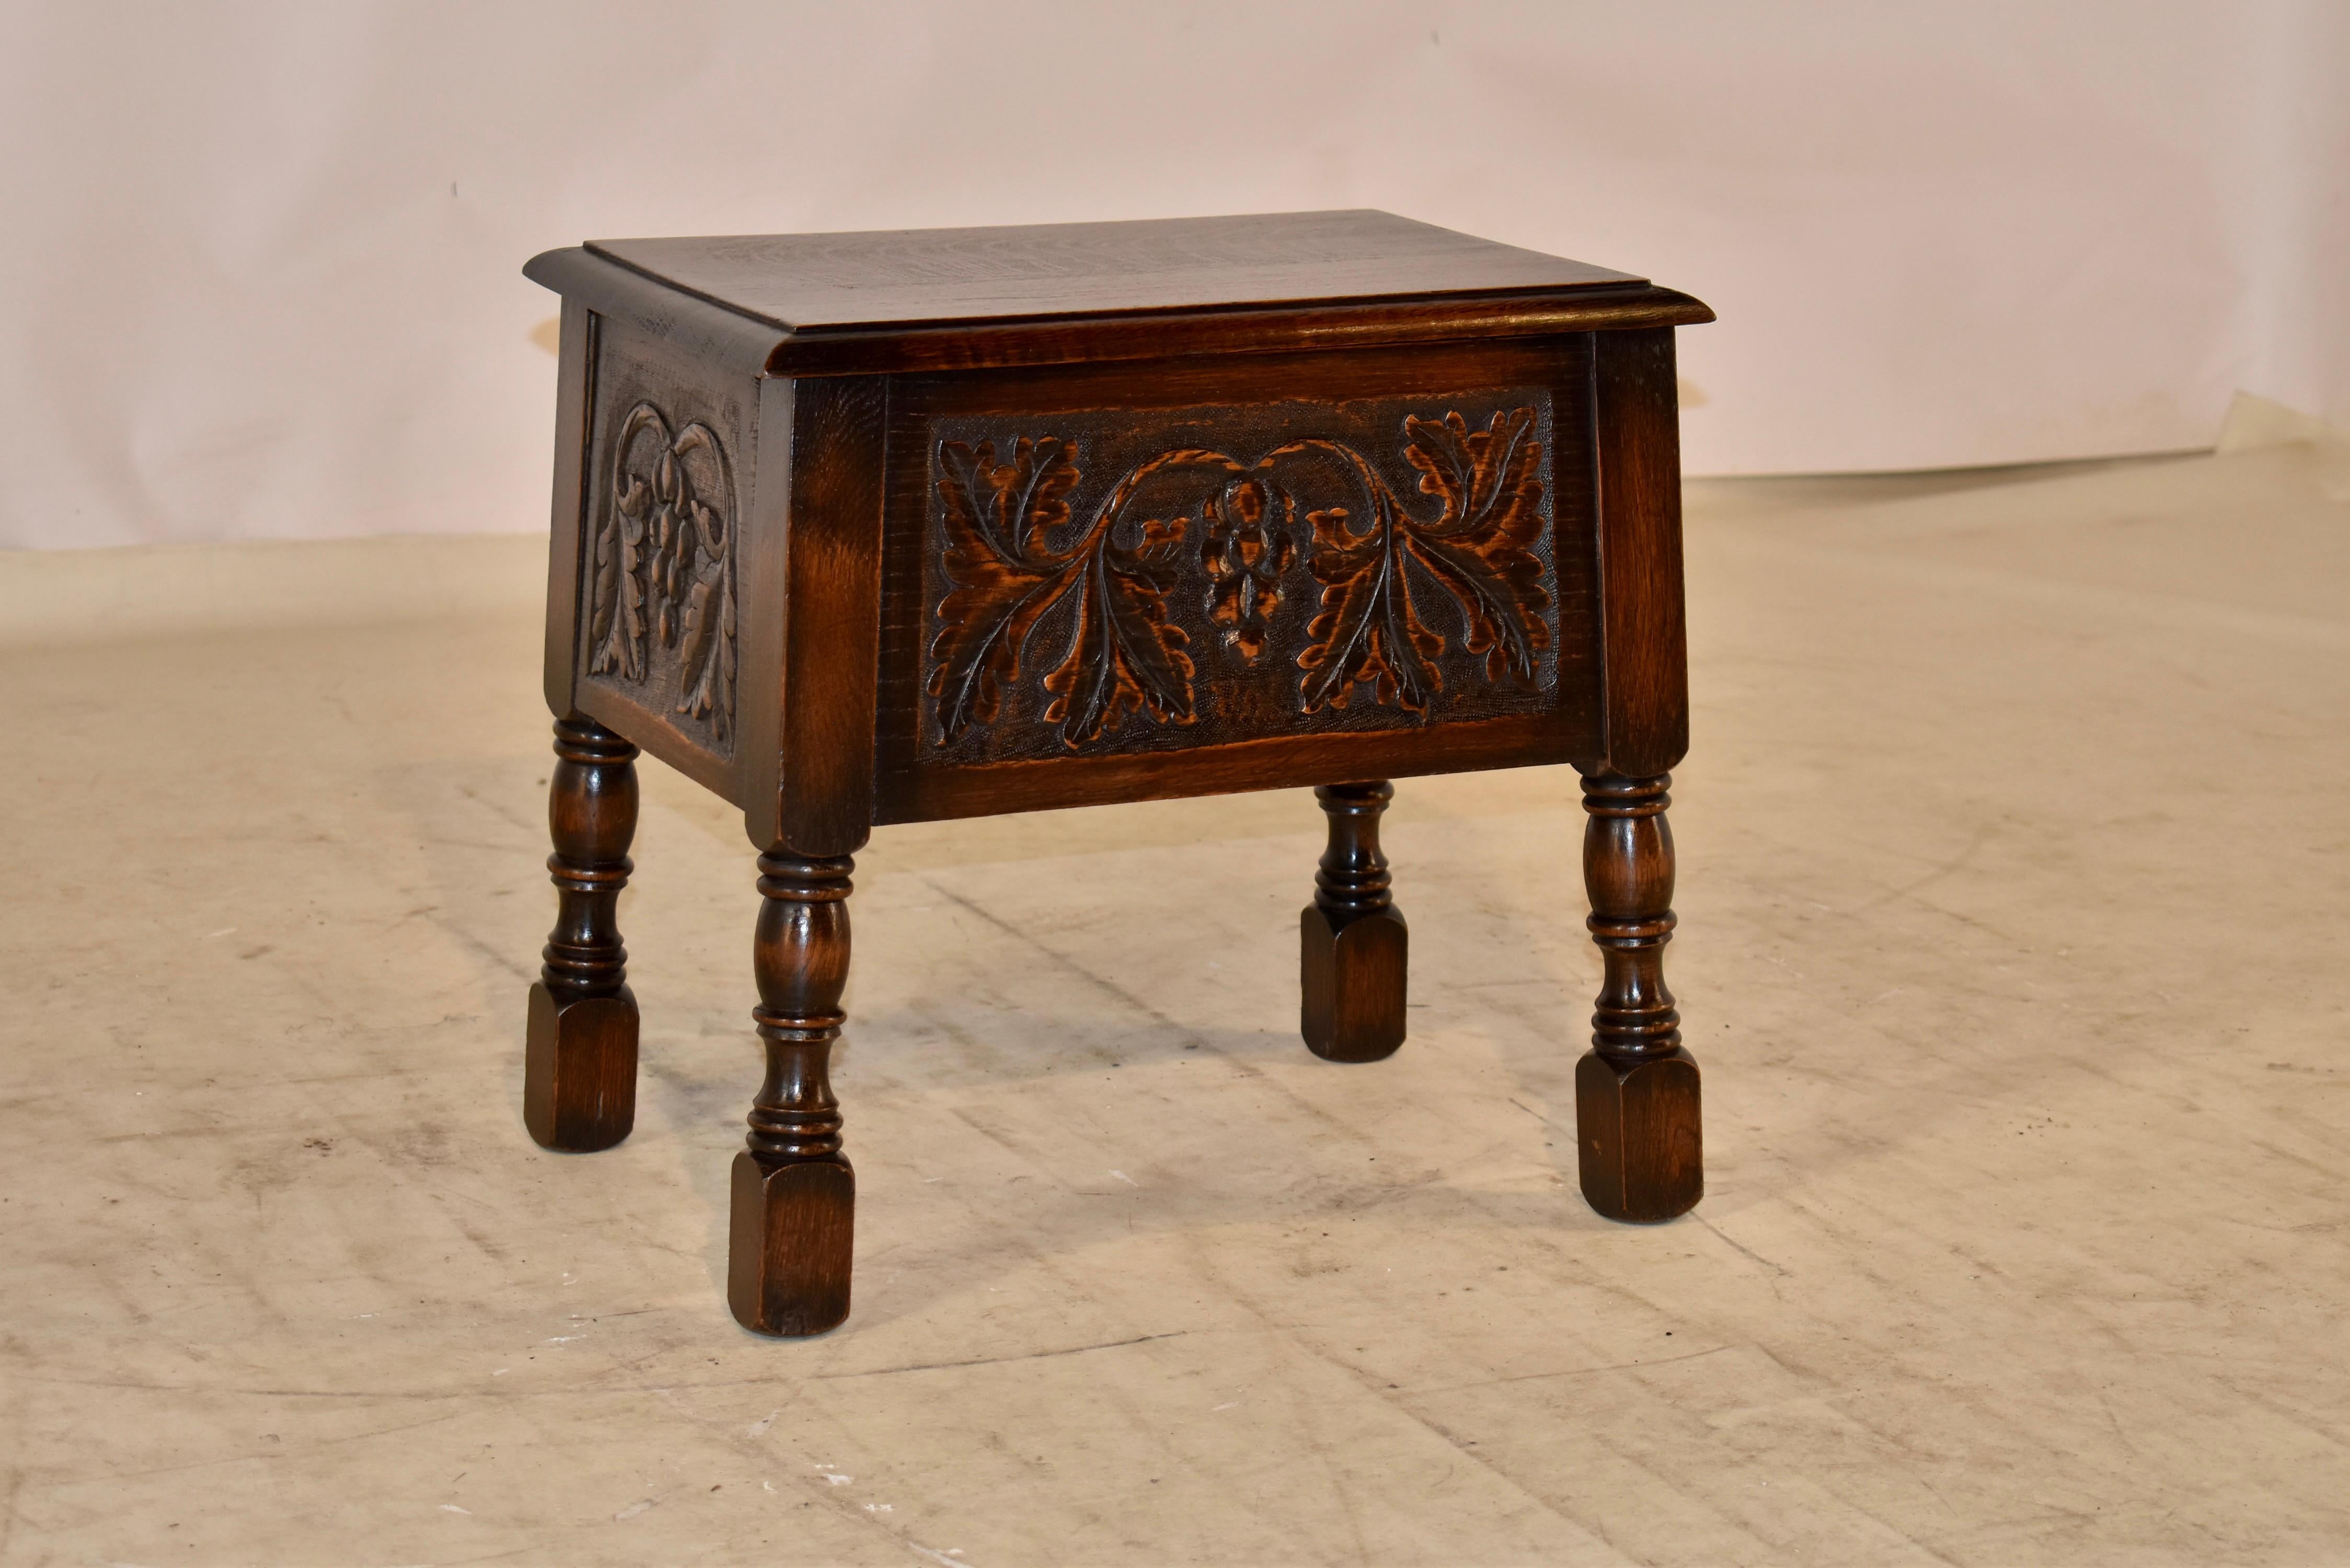 19th century oak lift top stool from England. The top has a beveled edge and lifts to reveal storage. The stool is hand carved decorated on all four sides for easy placement in any space, and is supported on hand turned legs. the hand carved